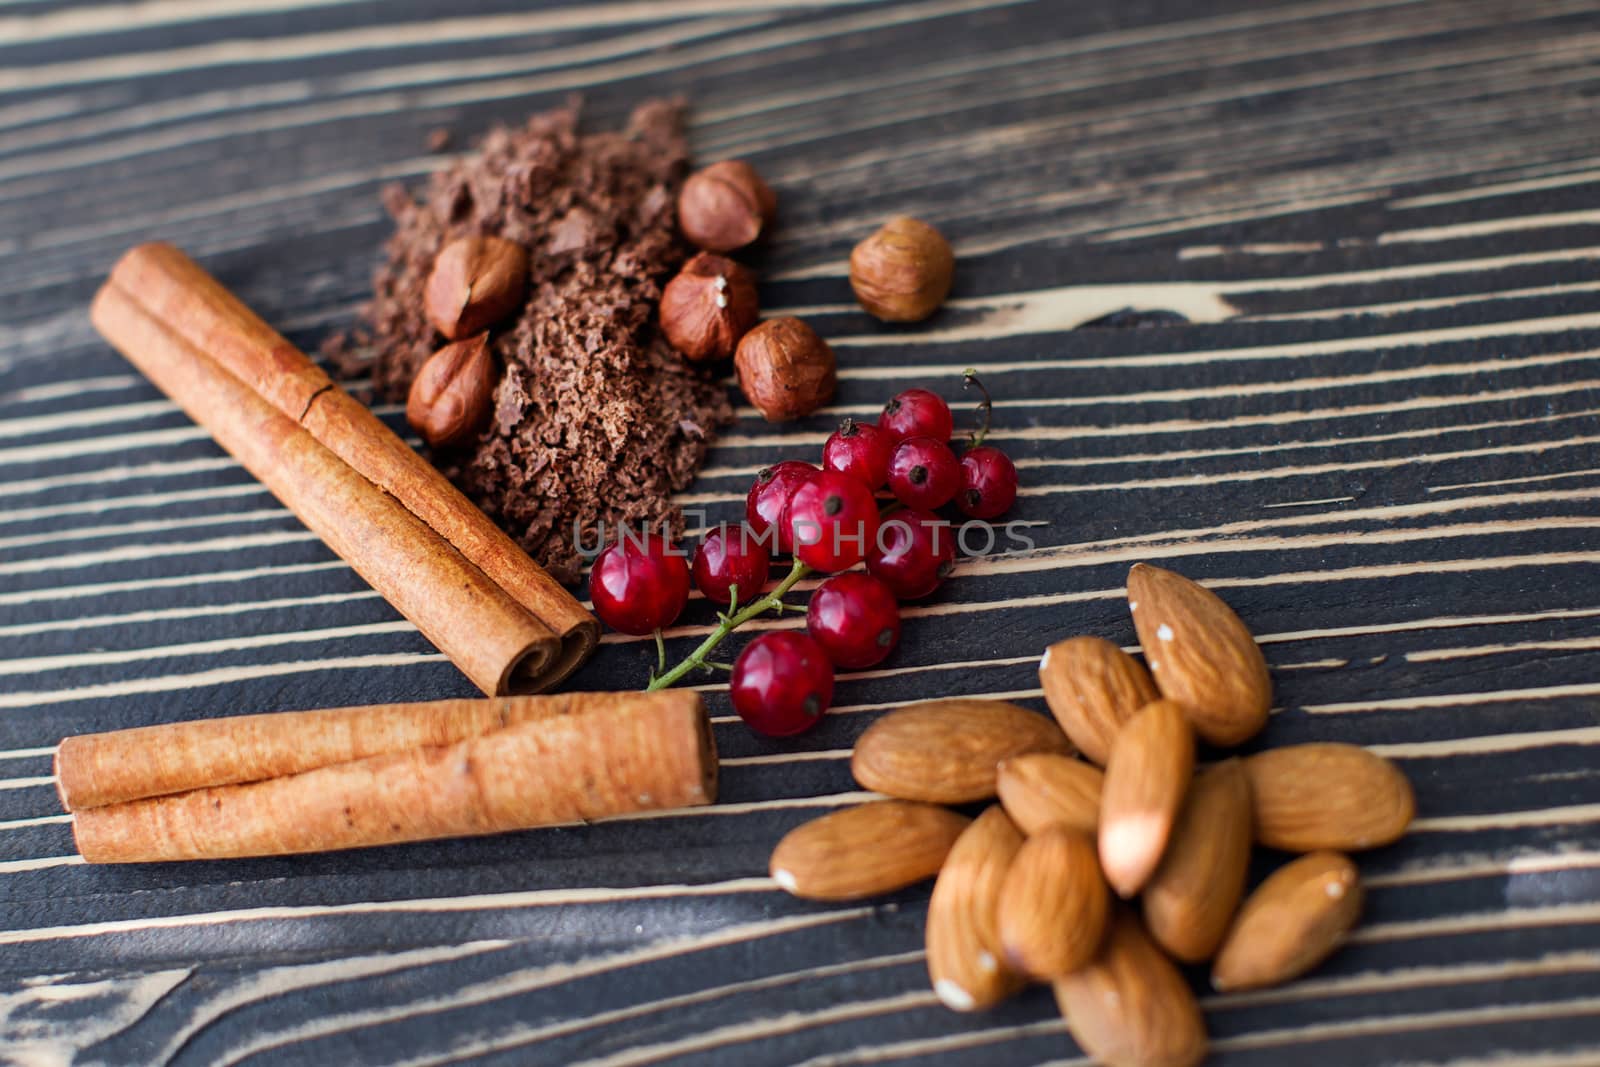 Nuts, cinnamon, candied fruits, chocolate chips lie on the texture table